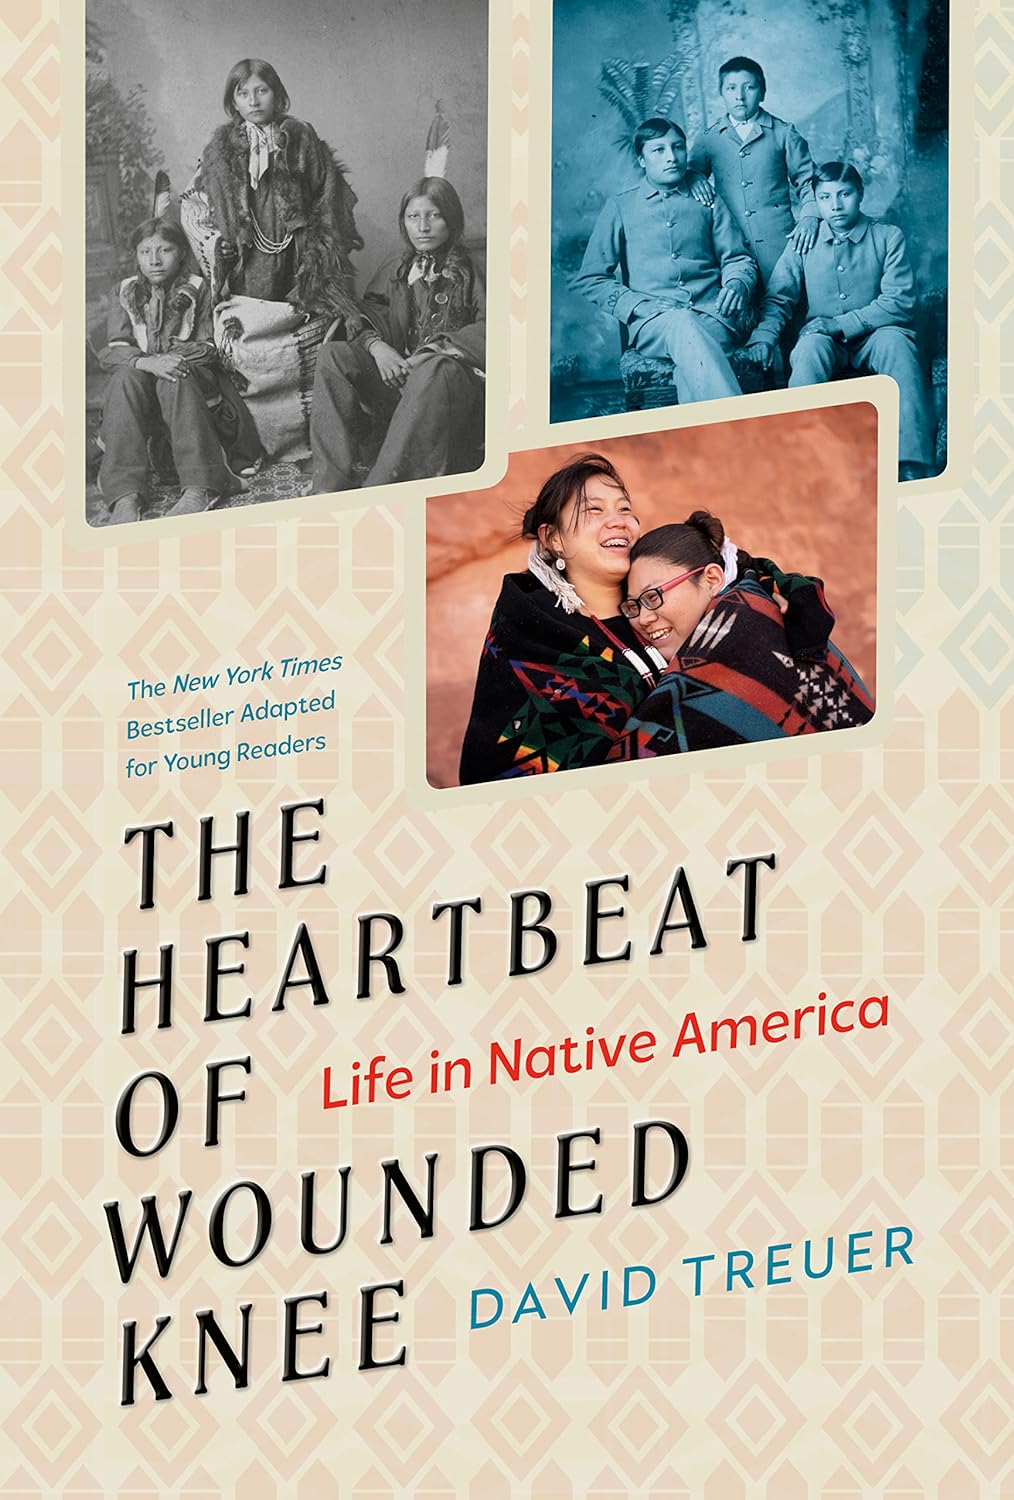 Book cover of The Heartbeat of Wounded Knee